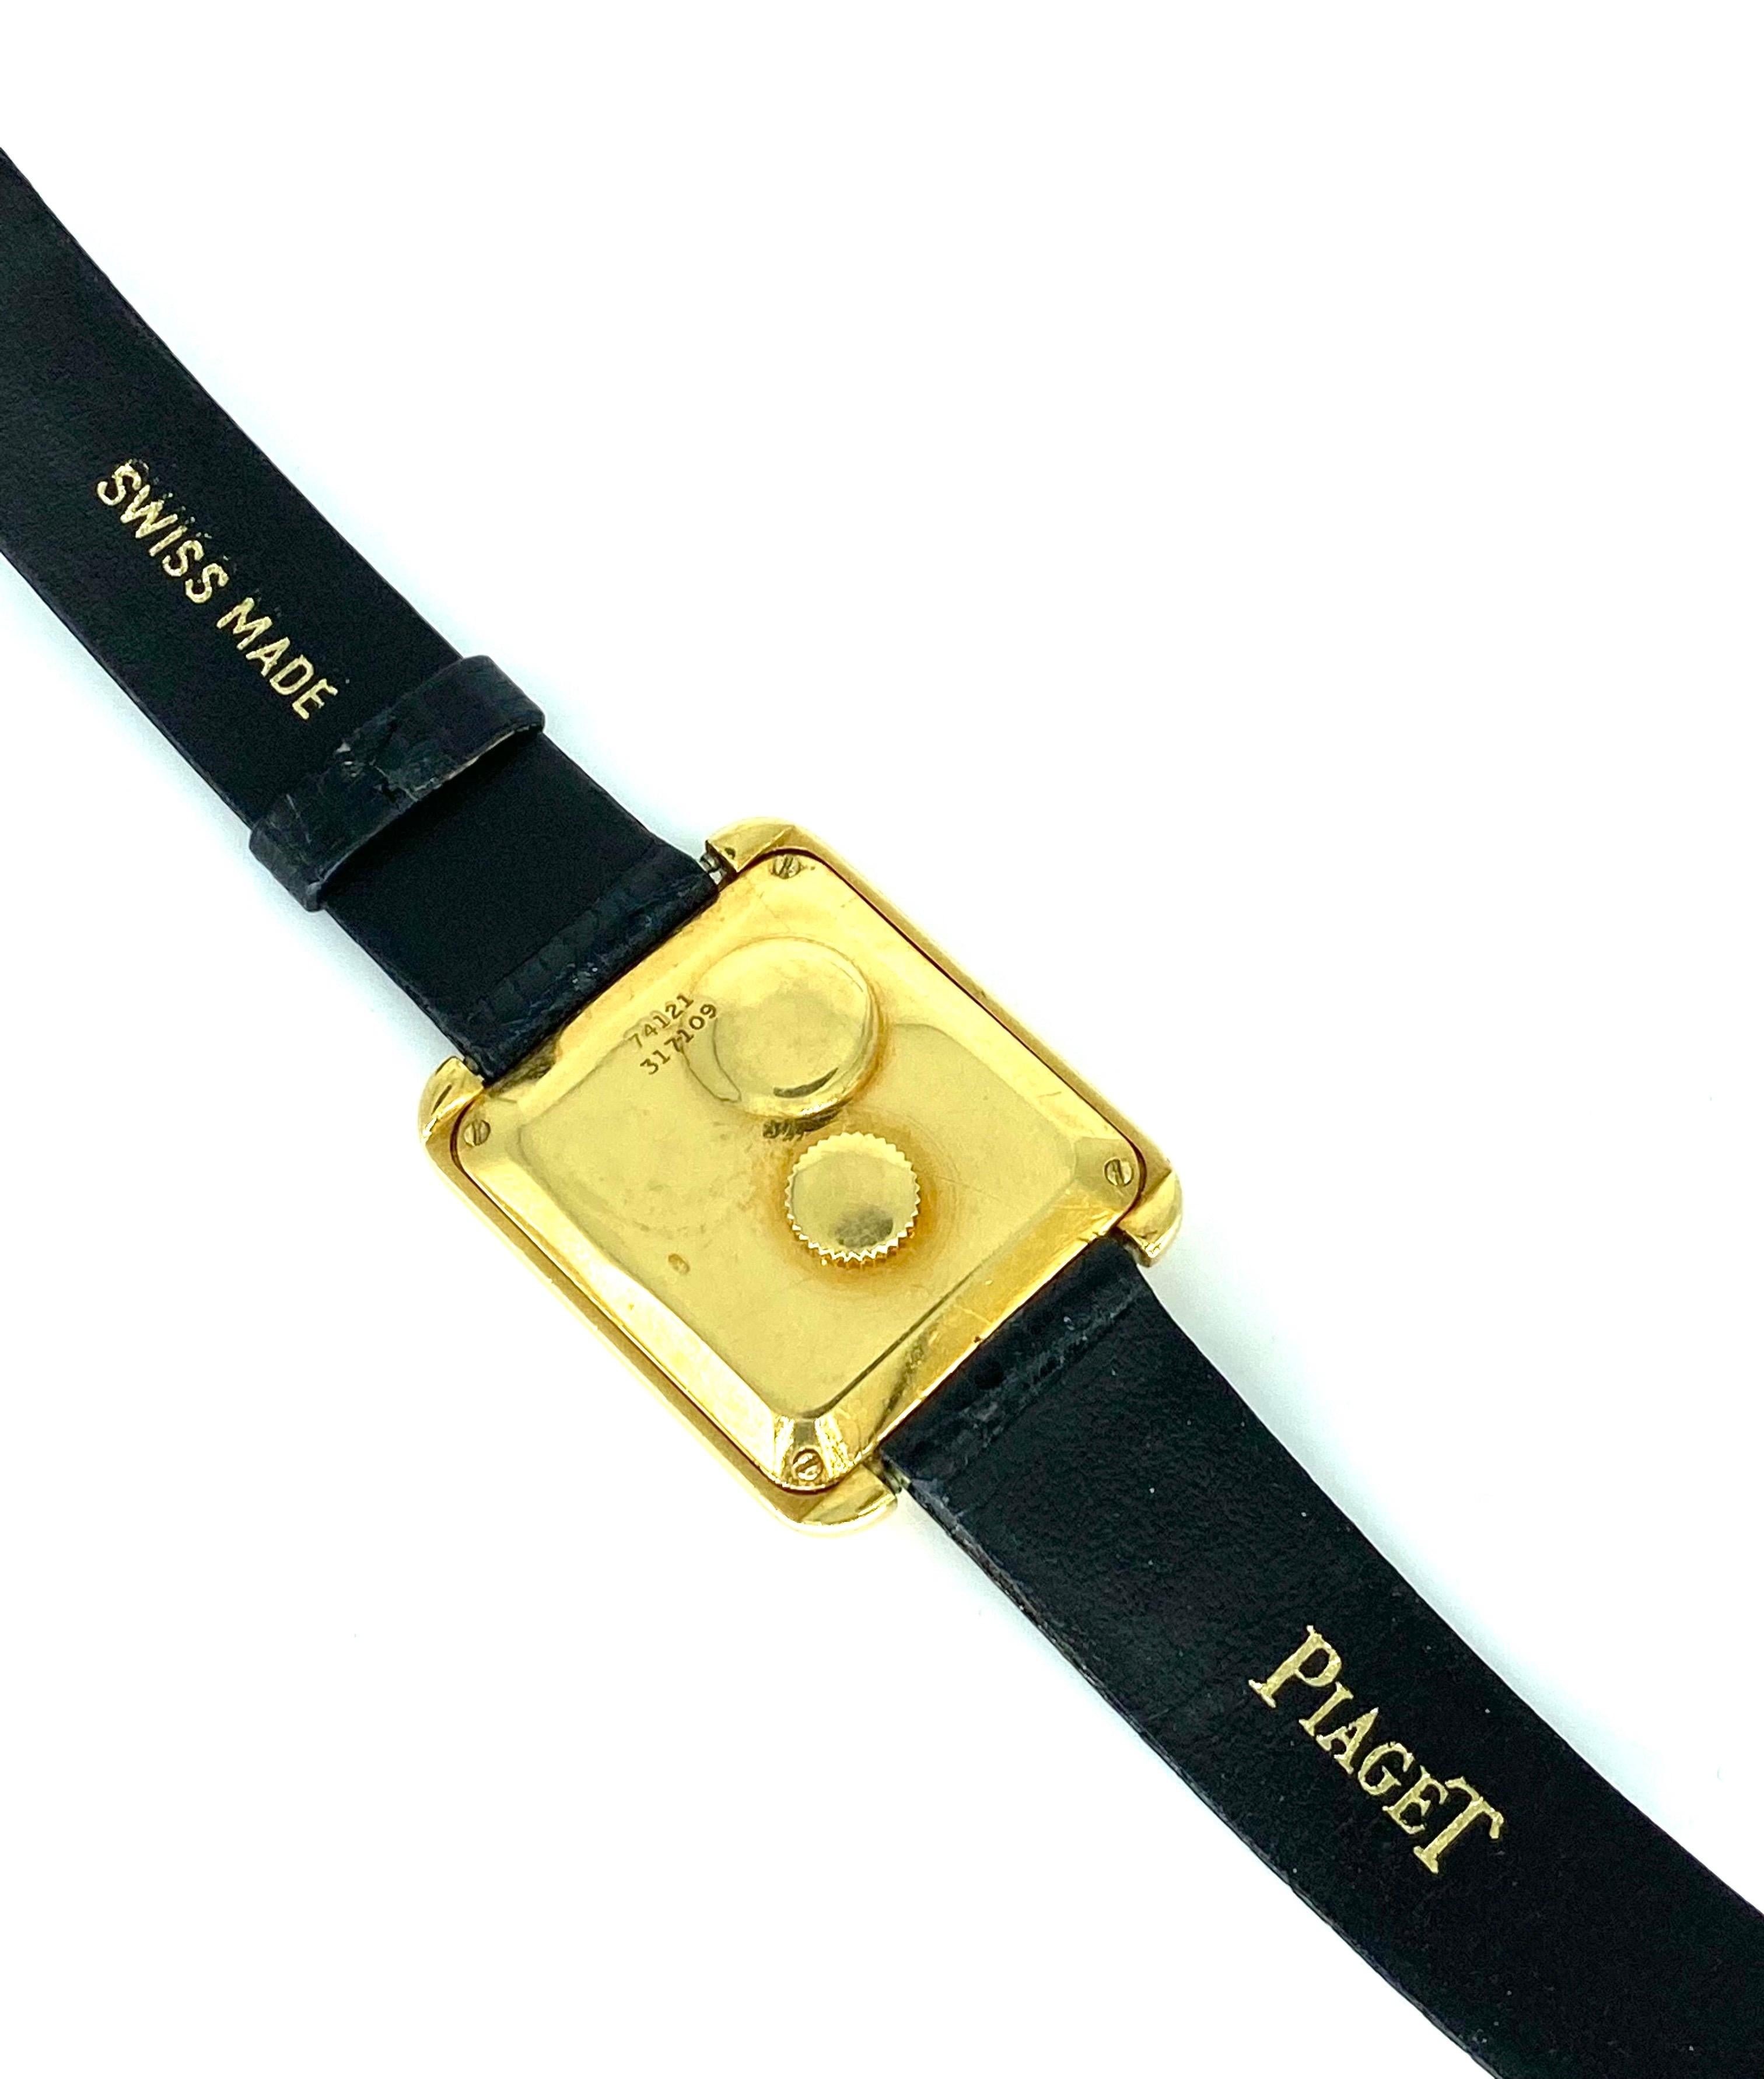 Piaget Stepped Case 18k Solid Gold Watch circa 1980’s For Sale 1